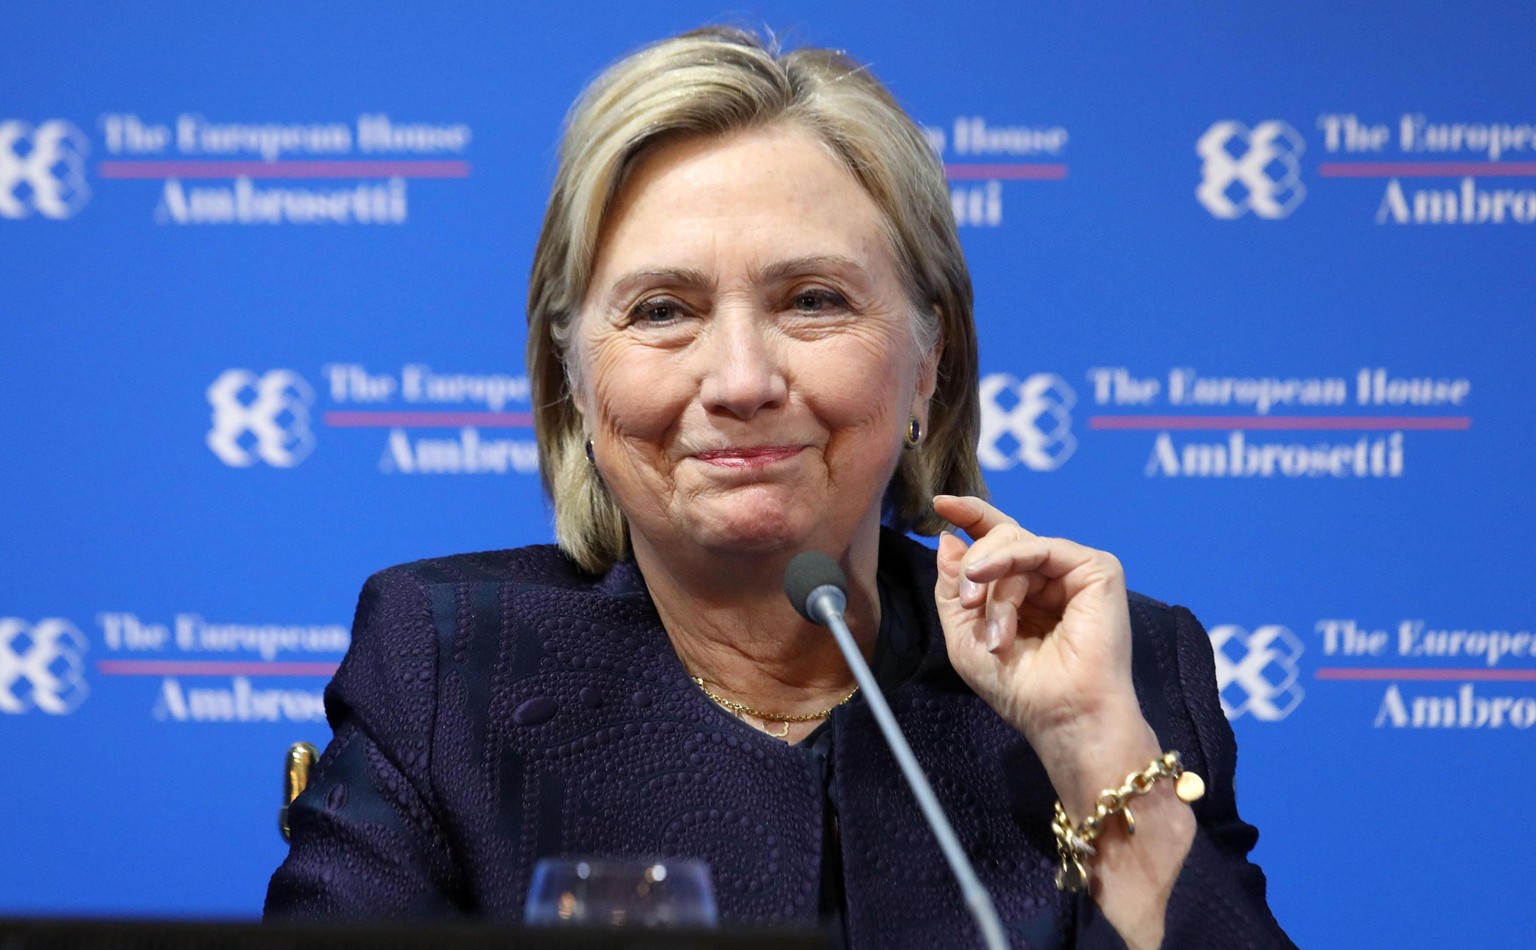 epa07825910 Hillary Rodham Clinton attends during the forum the European house Ambrosetti held in Cernobbio, Italy, 07 September 2019. The 45th editiion edition of the annual international economic co ...